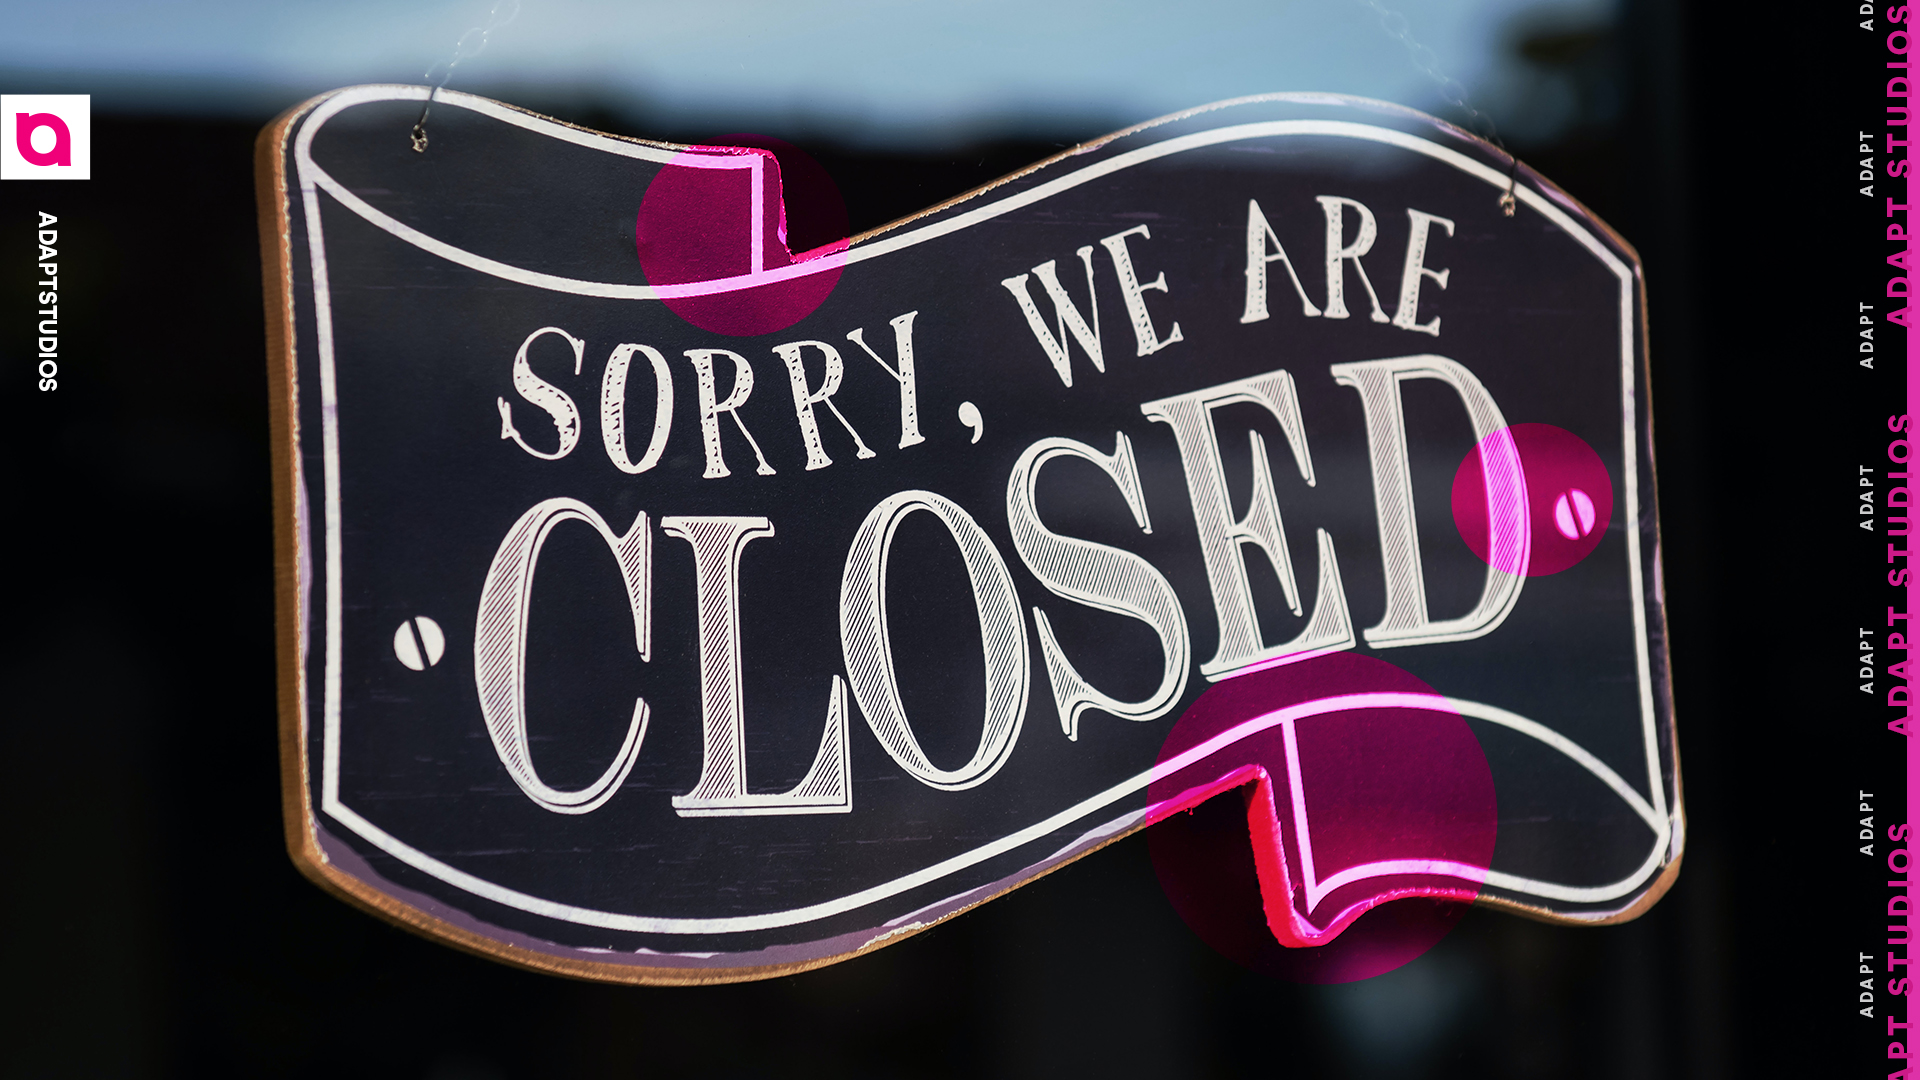 What to focus on when your business is temporarily closed